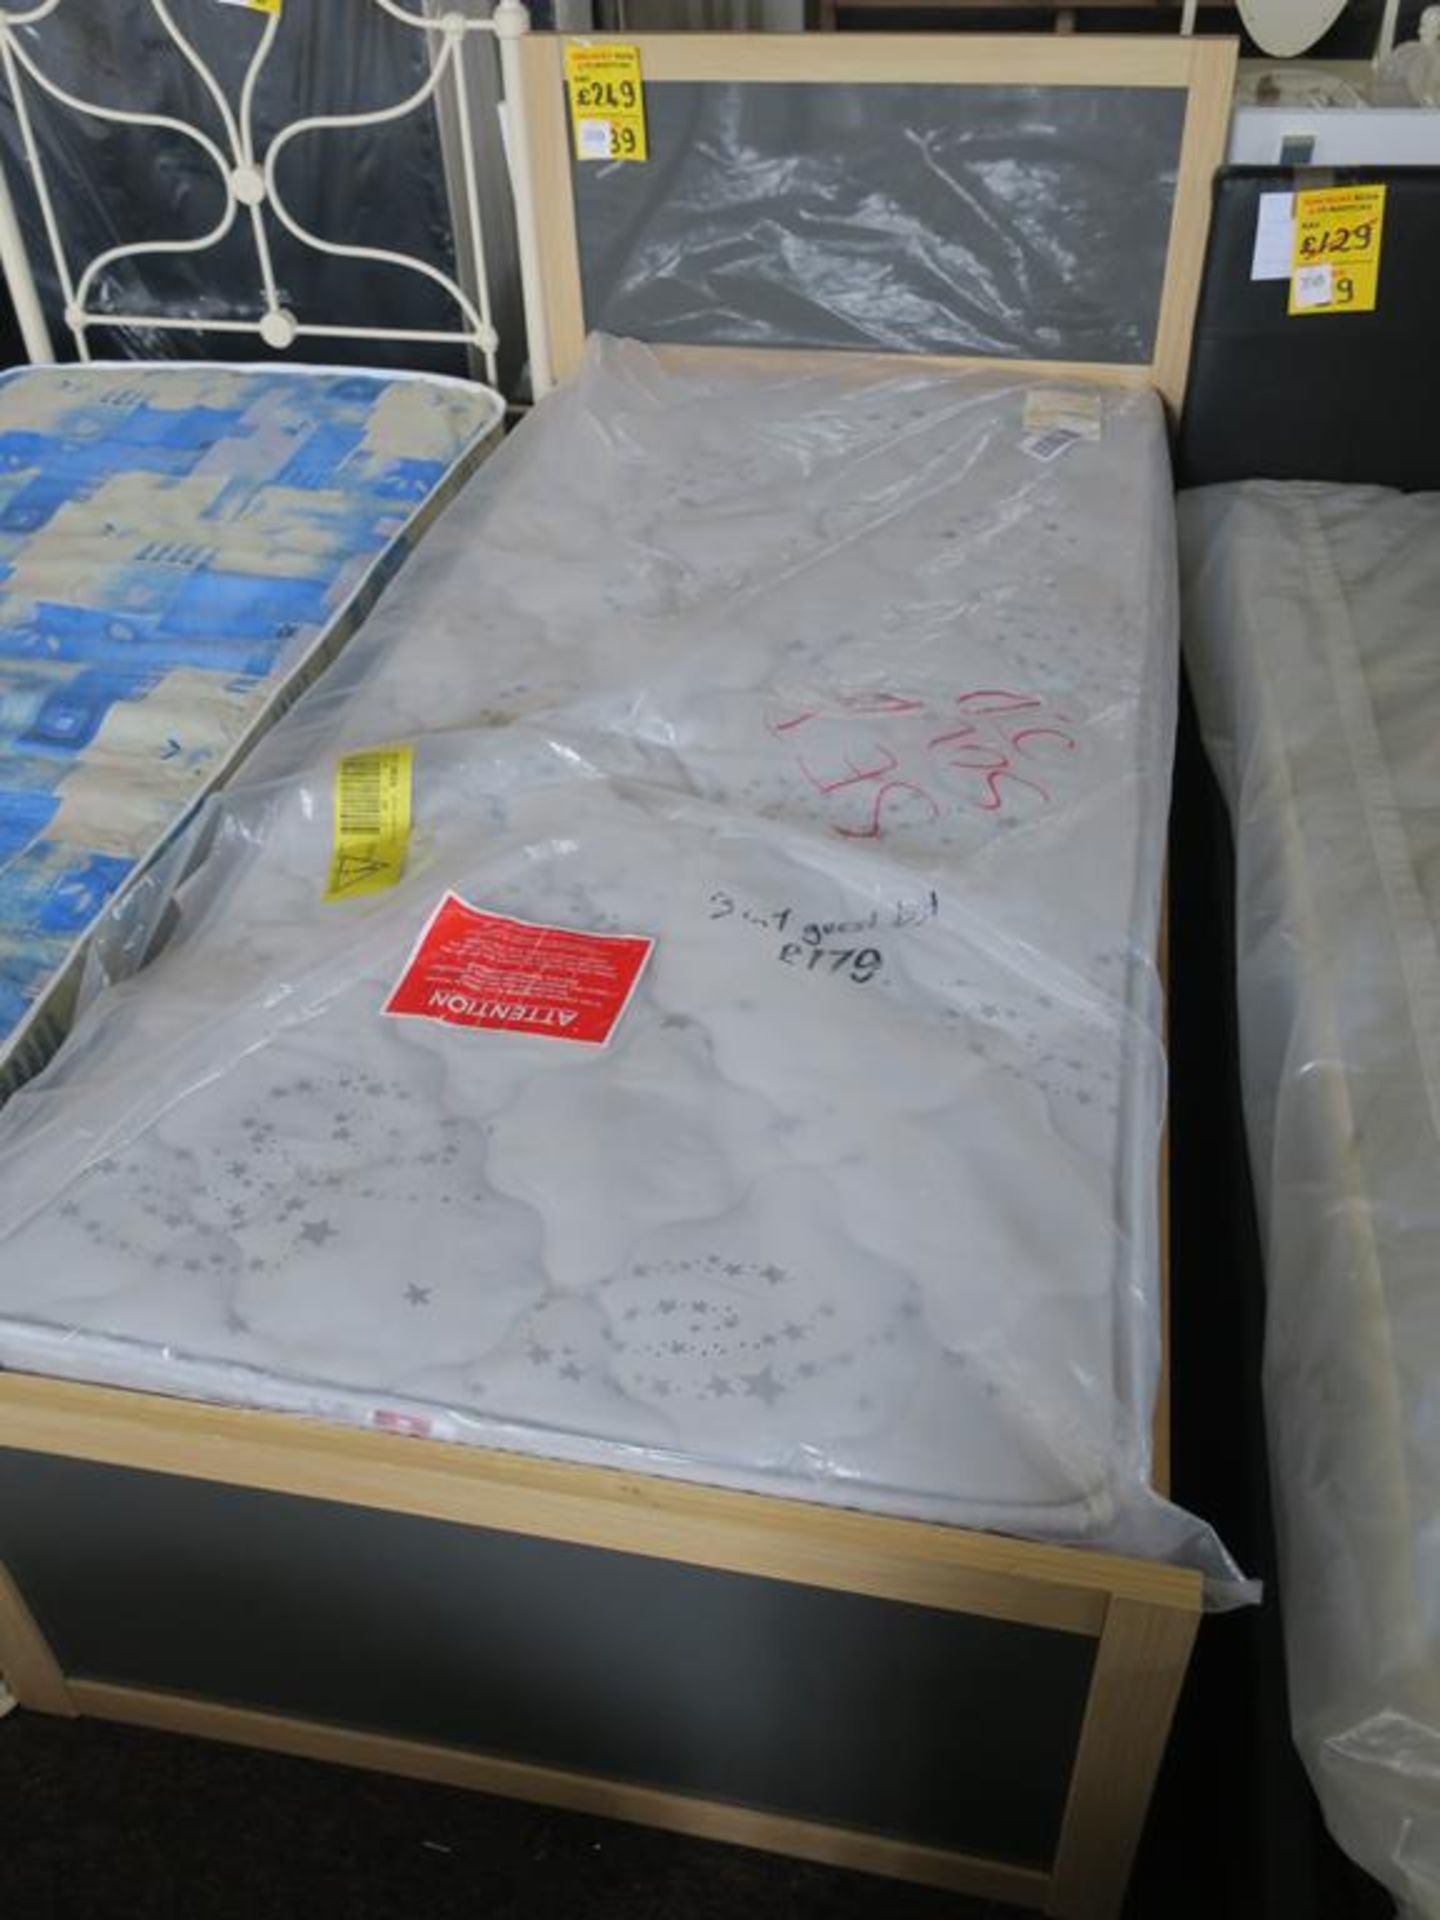 * A Strada Single Bed Frame Together with a Single Mattress